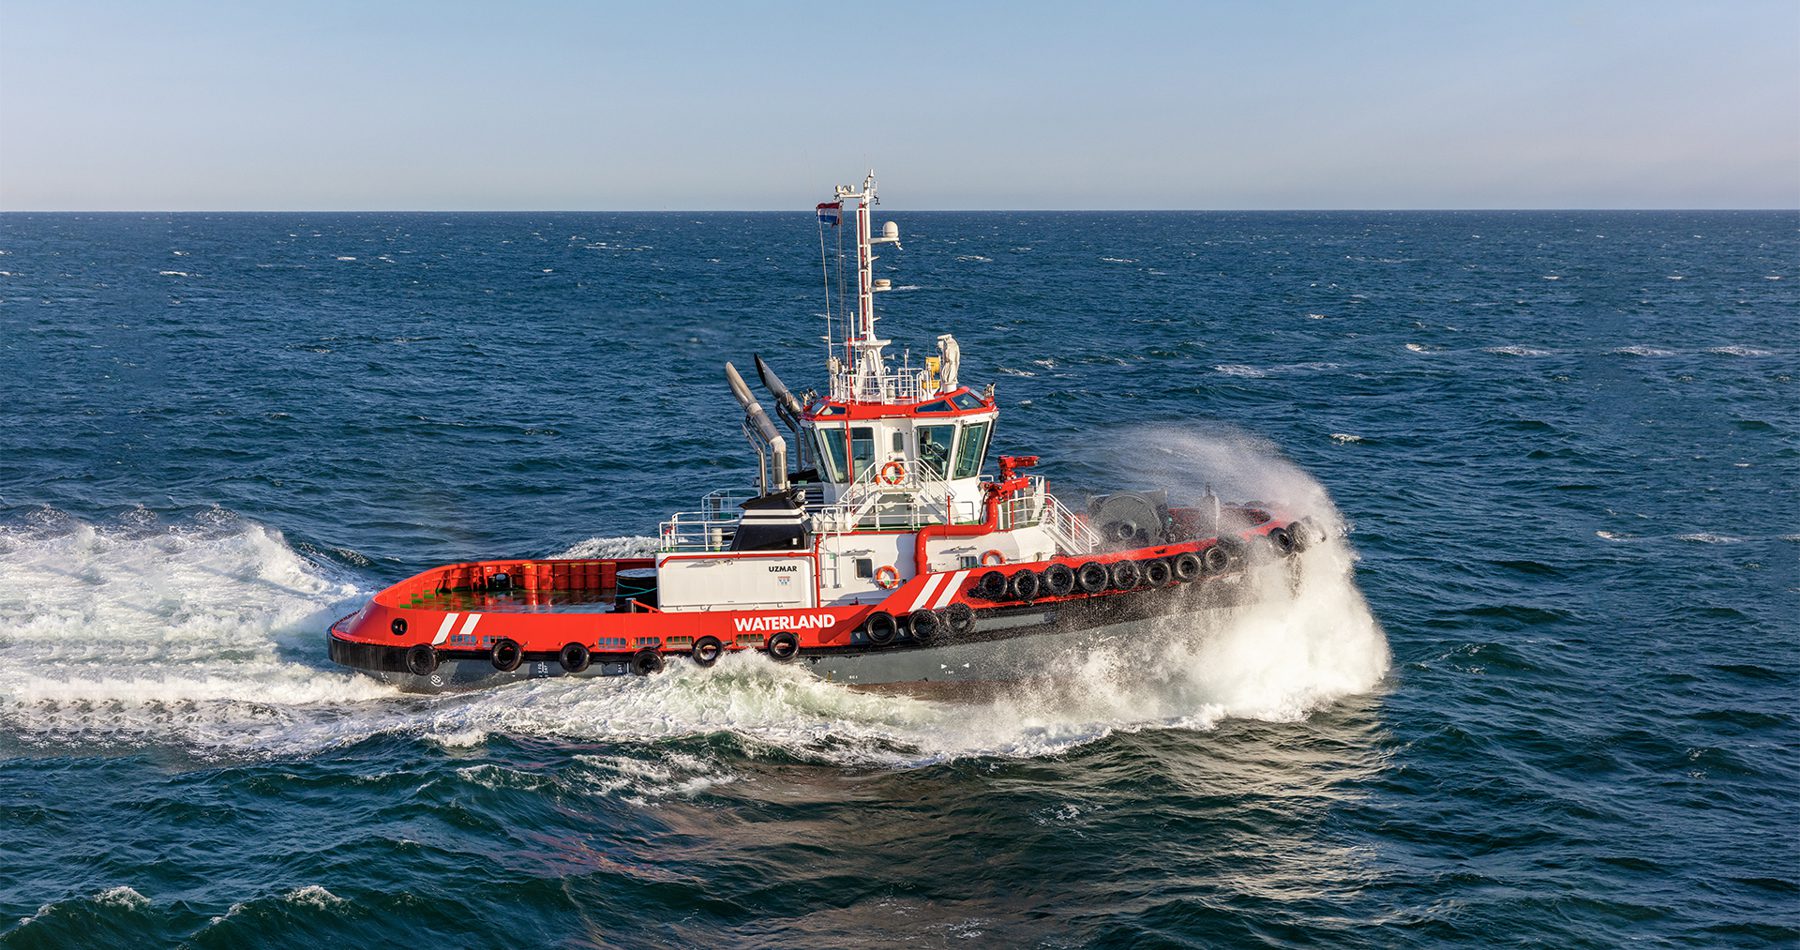 New purchased tug "Waterland" owned by Wagenborg